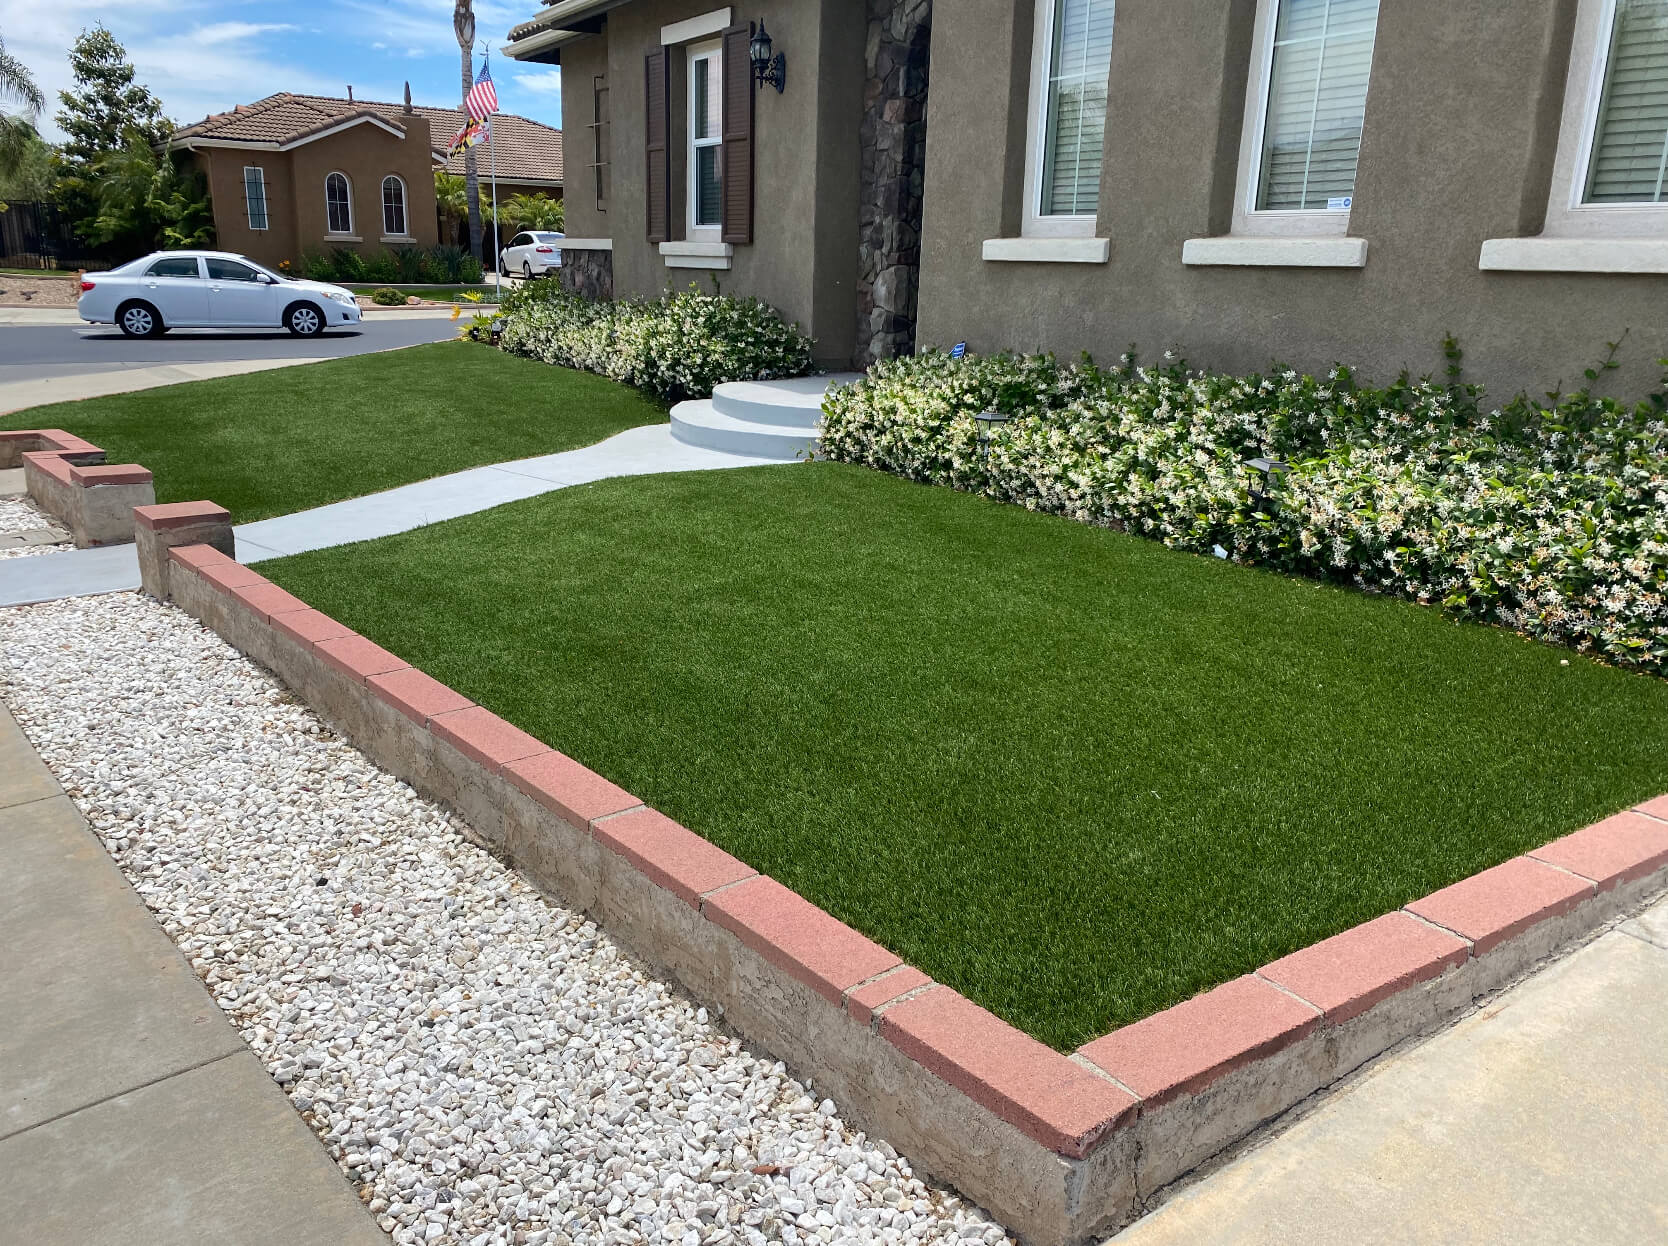 How Much is Artificial Lawn Installation?